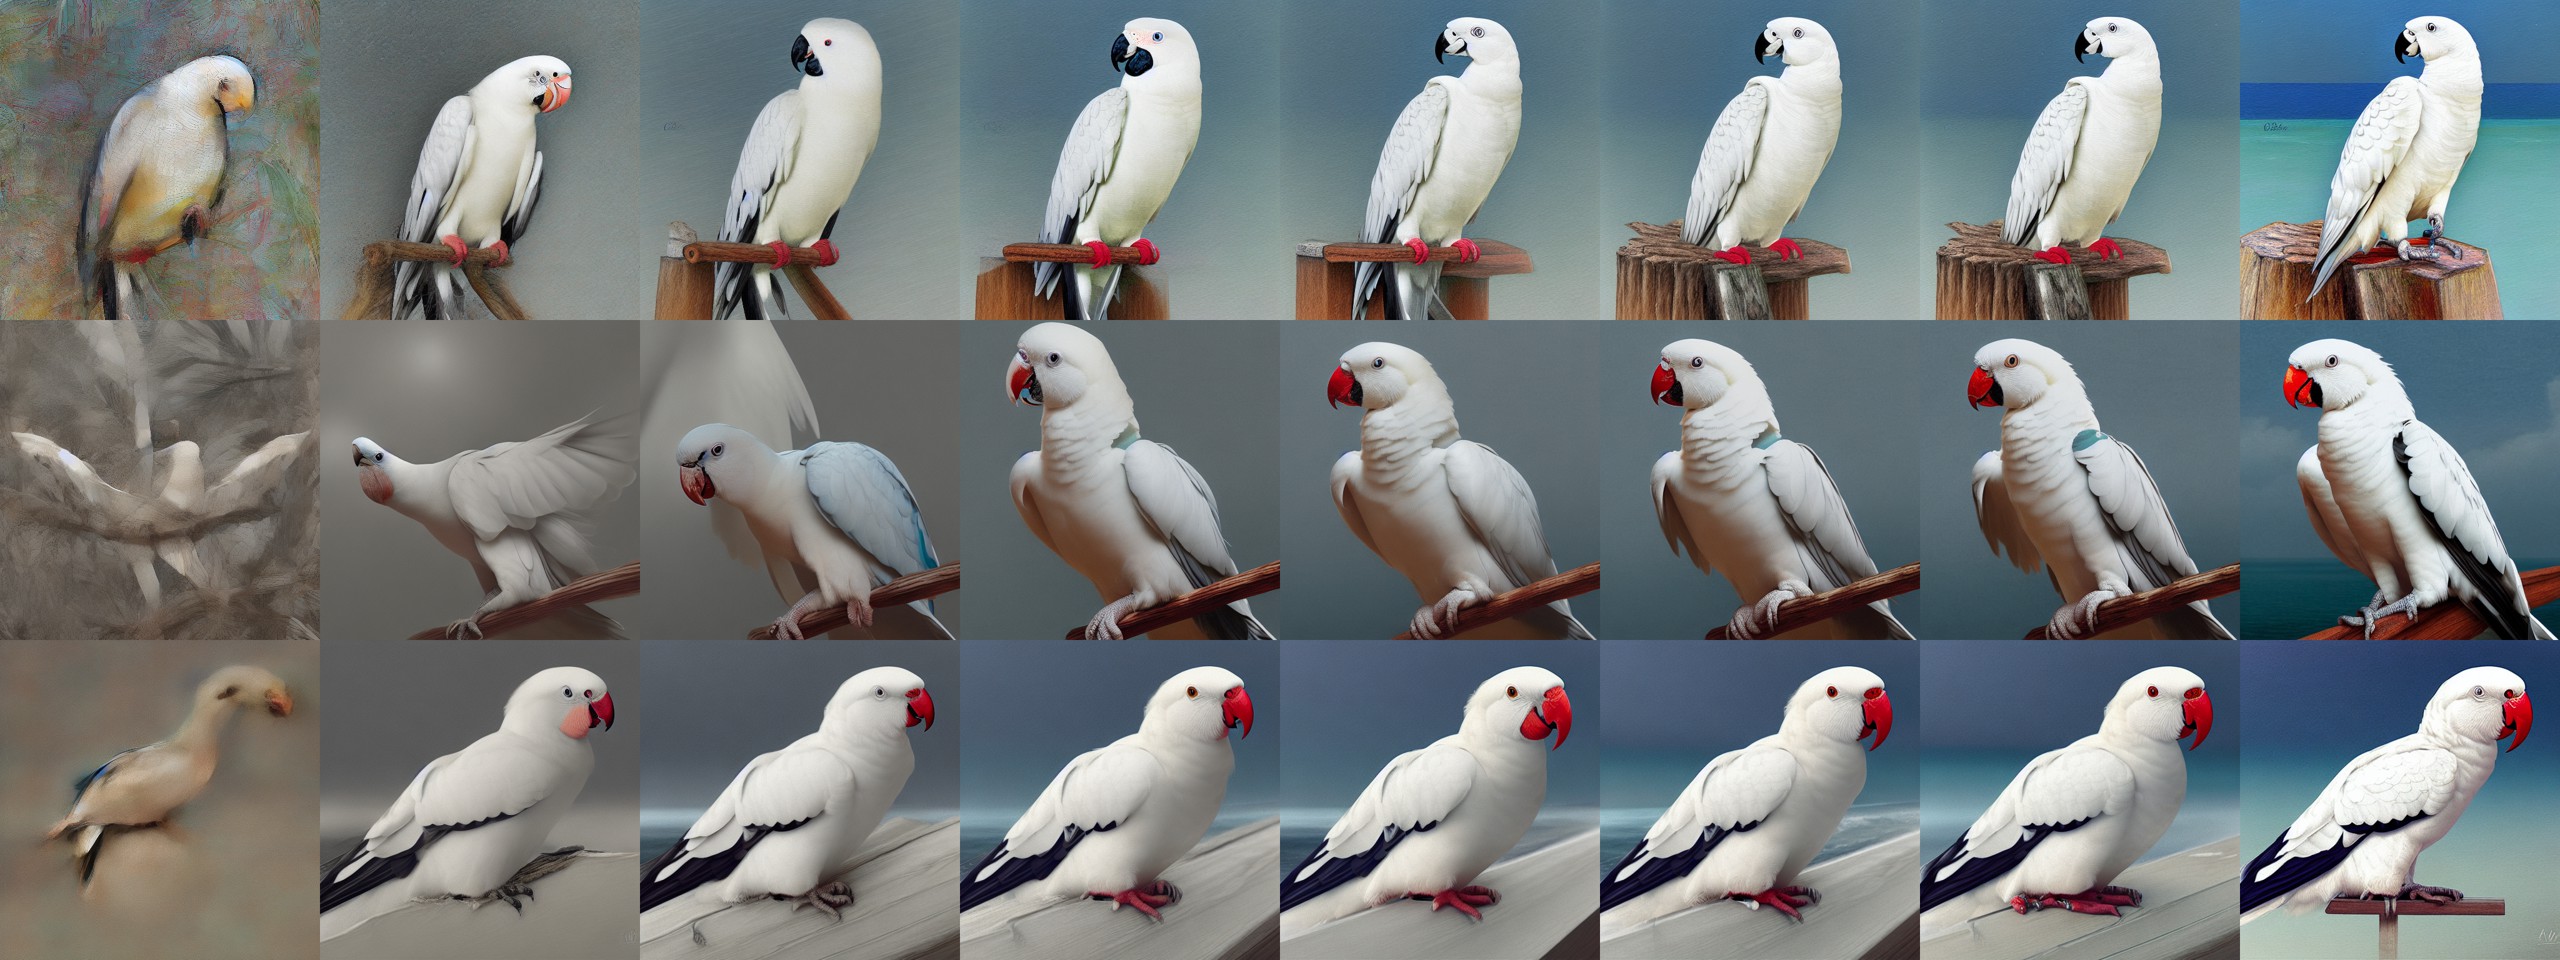 steps_a_white_parrot_sitting_by_the_se_seagull_1